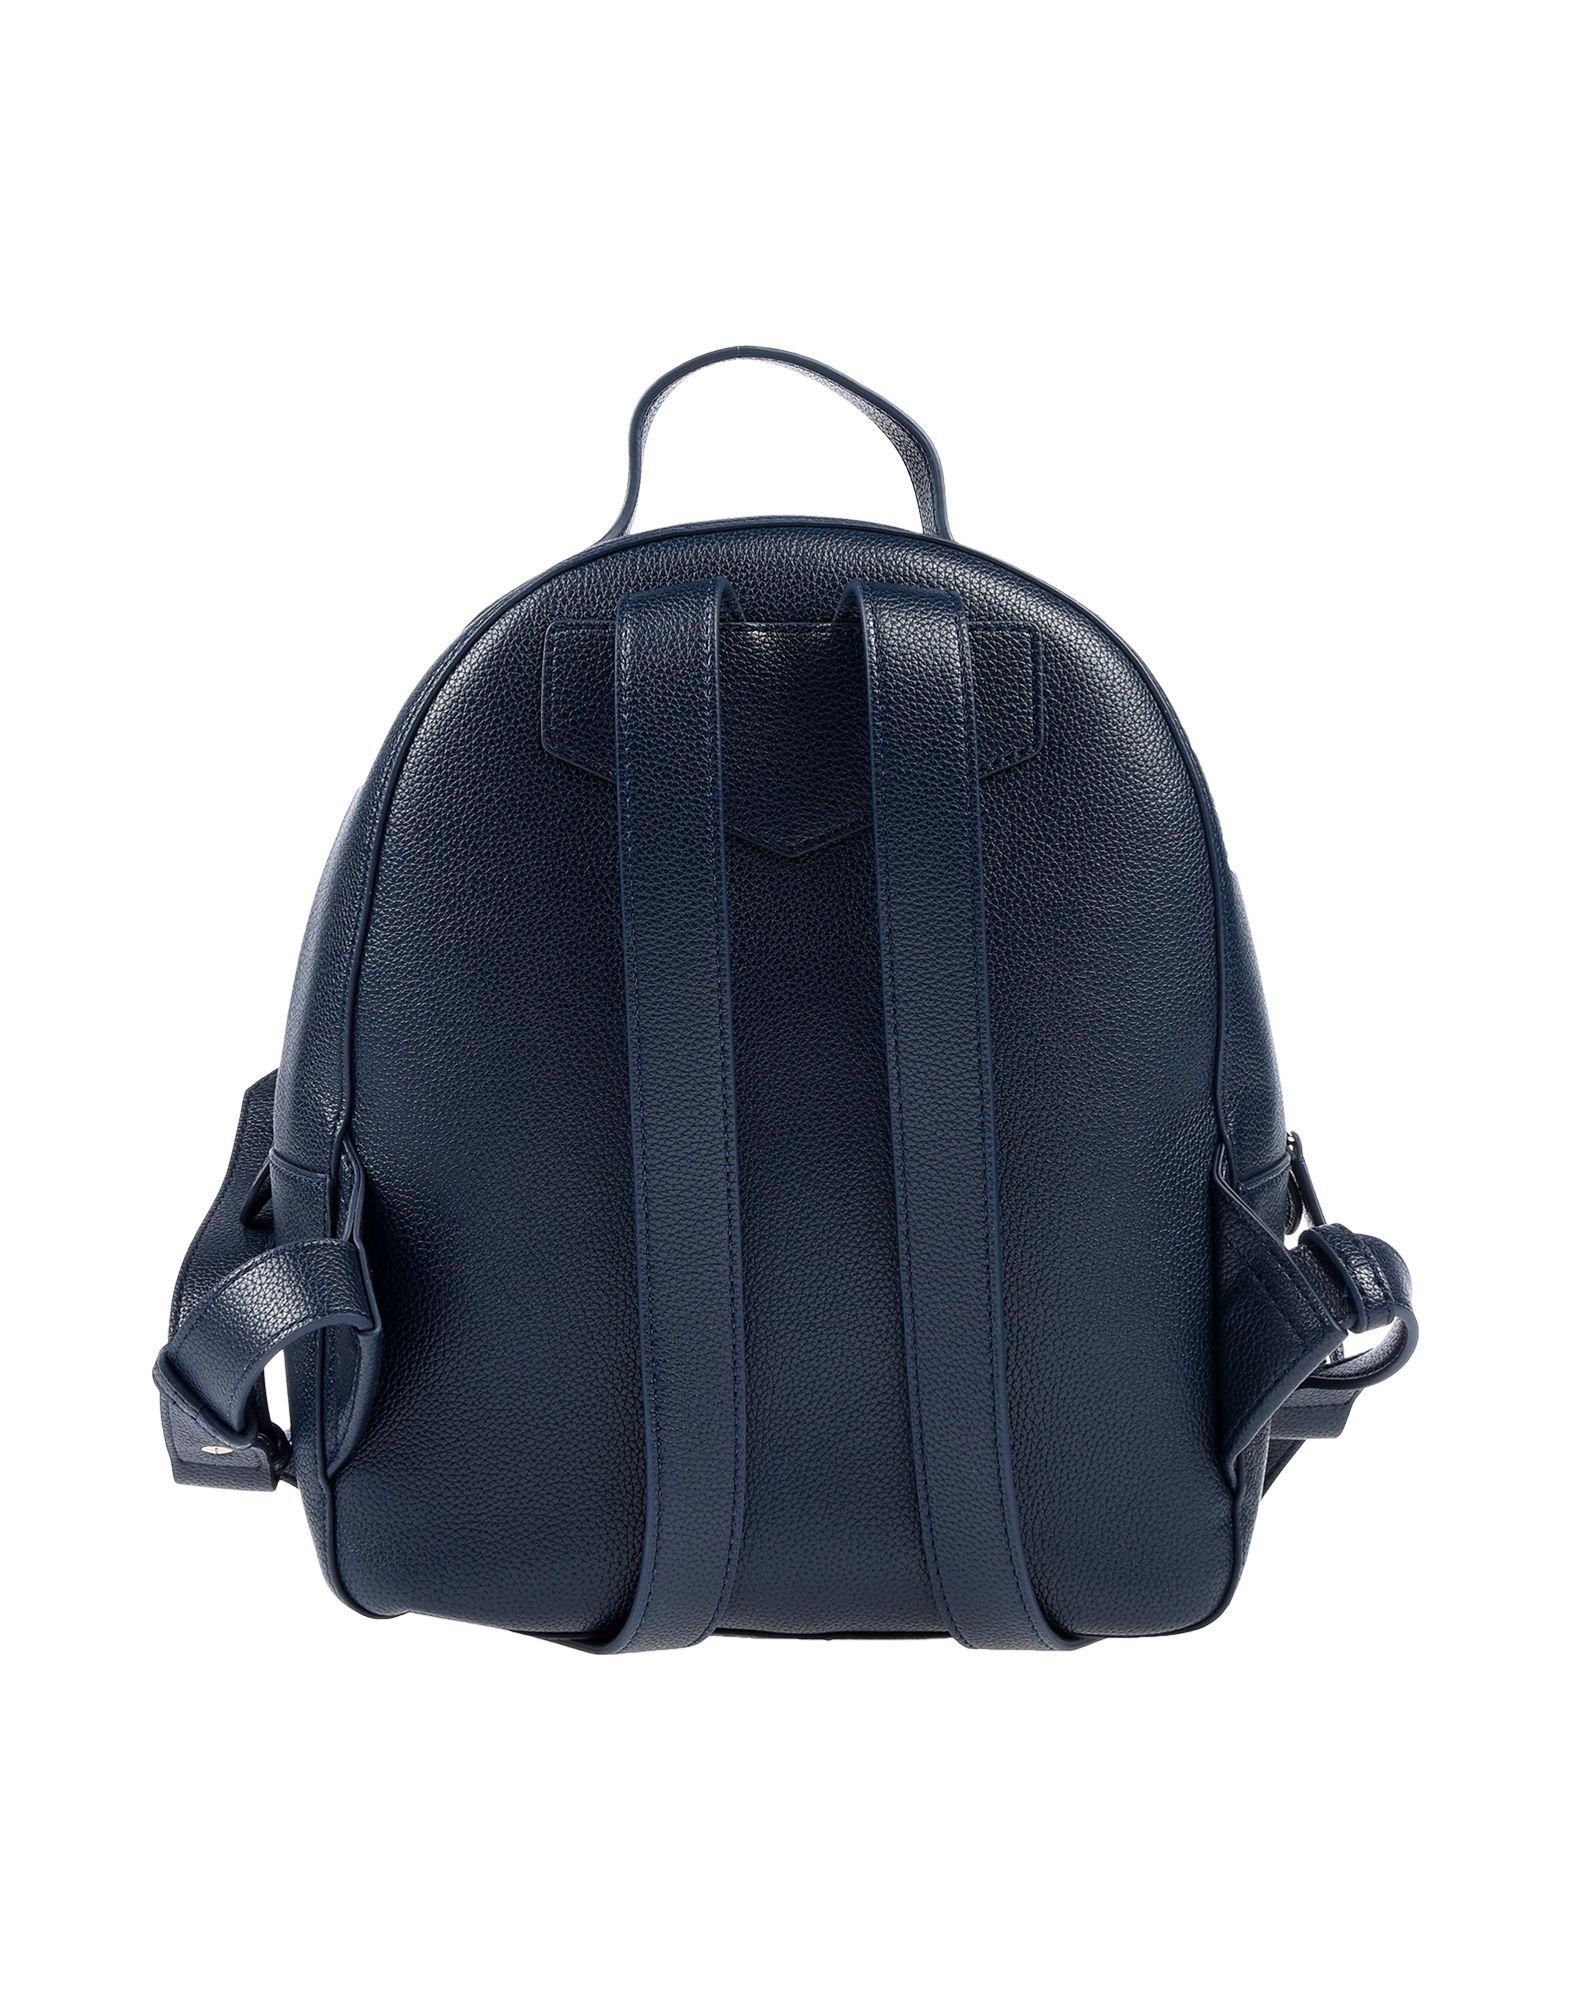 Emporio Armani Backpacks & Bum Bags in Blue - Lyst